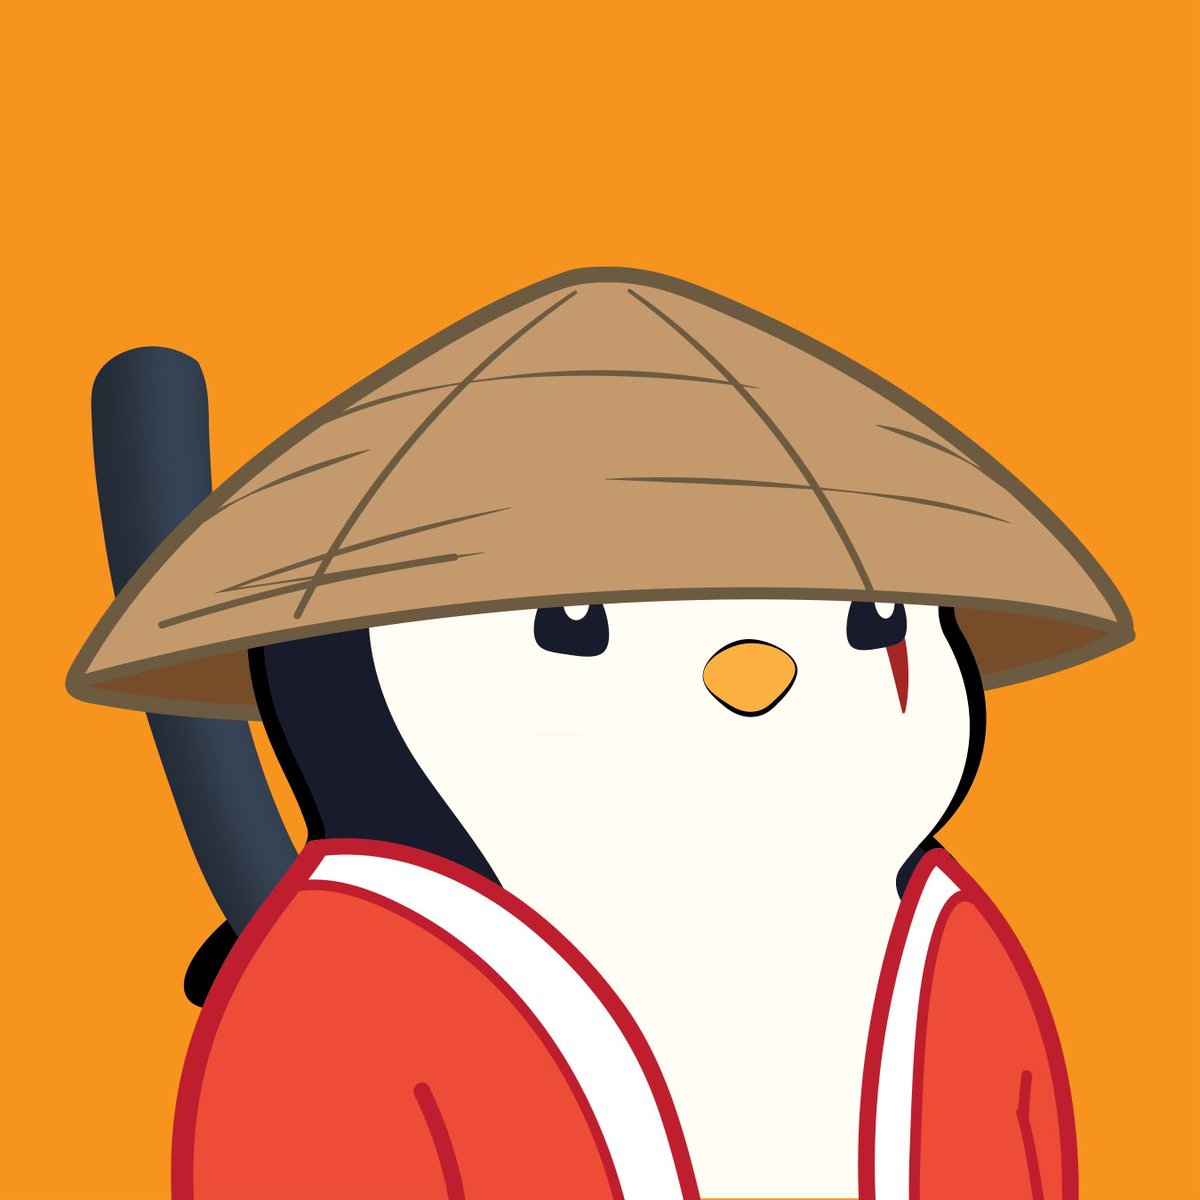 A penguin wearing brown hat, hanging sword and with a red mark under one eye